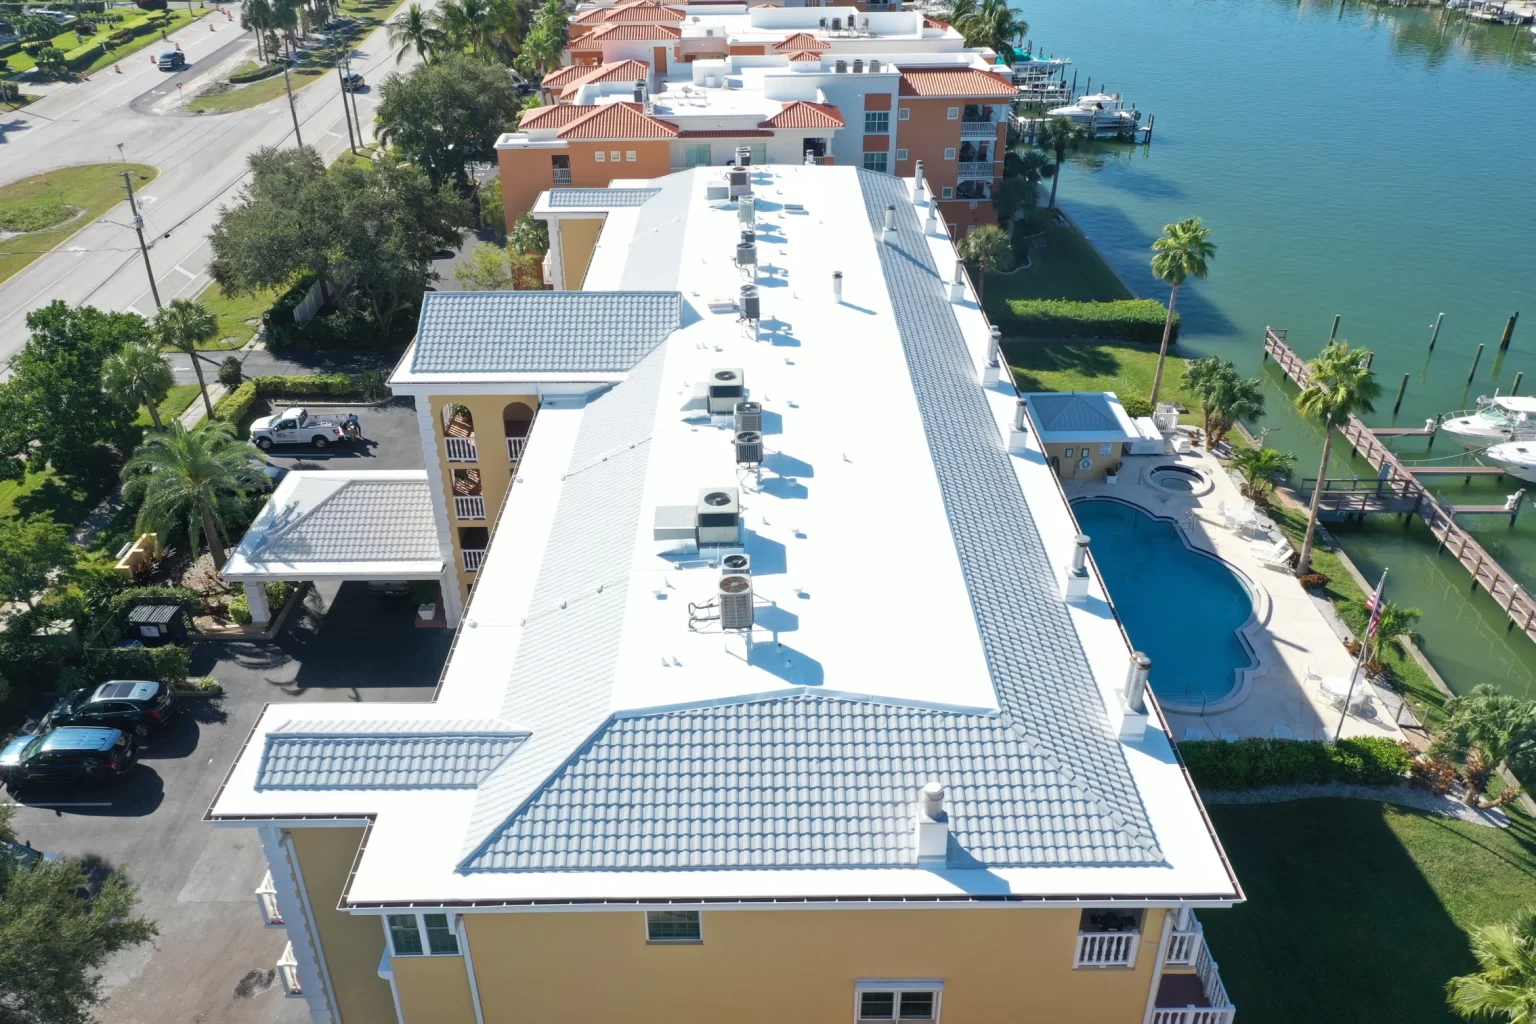 Commercial Roof Replacement in Tampa courtesy of CB Roofing